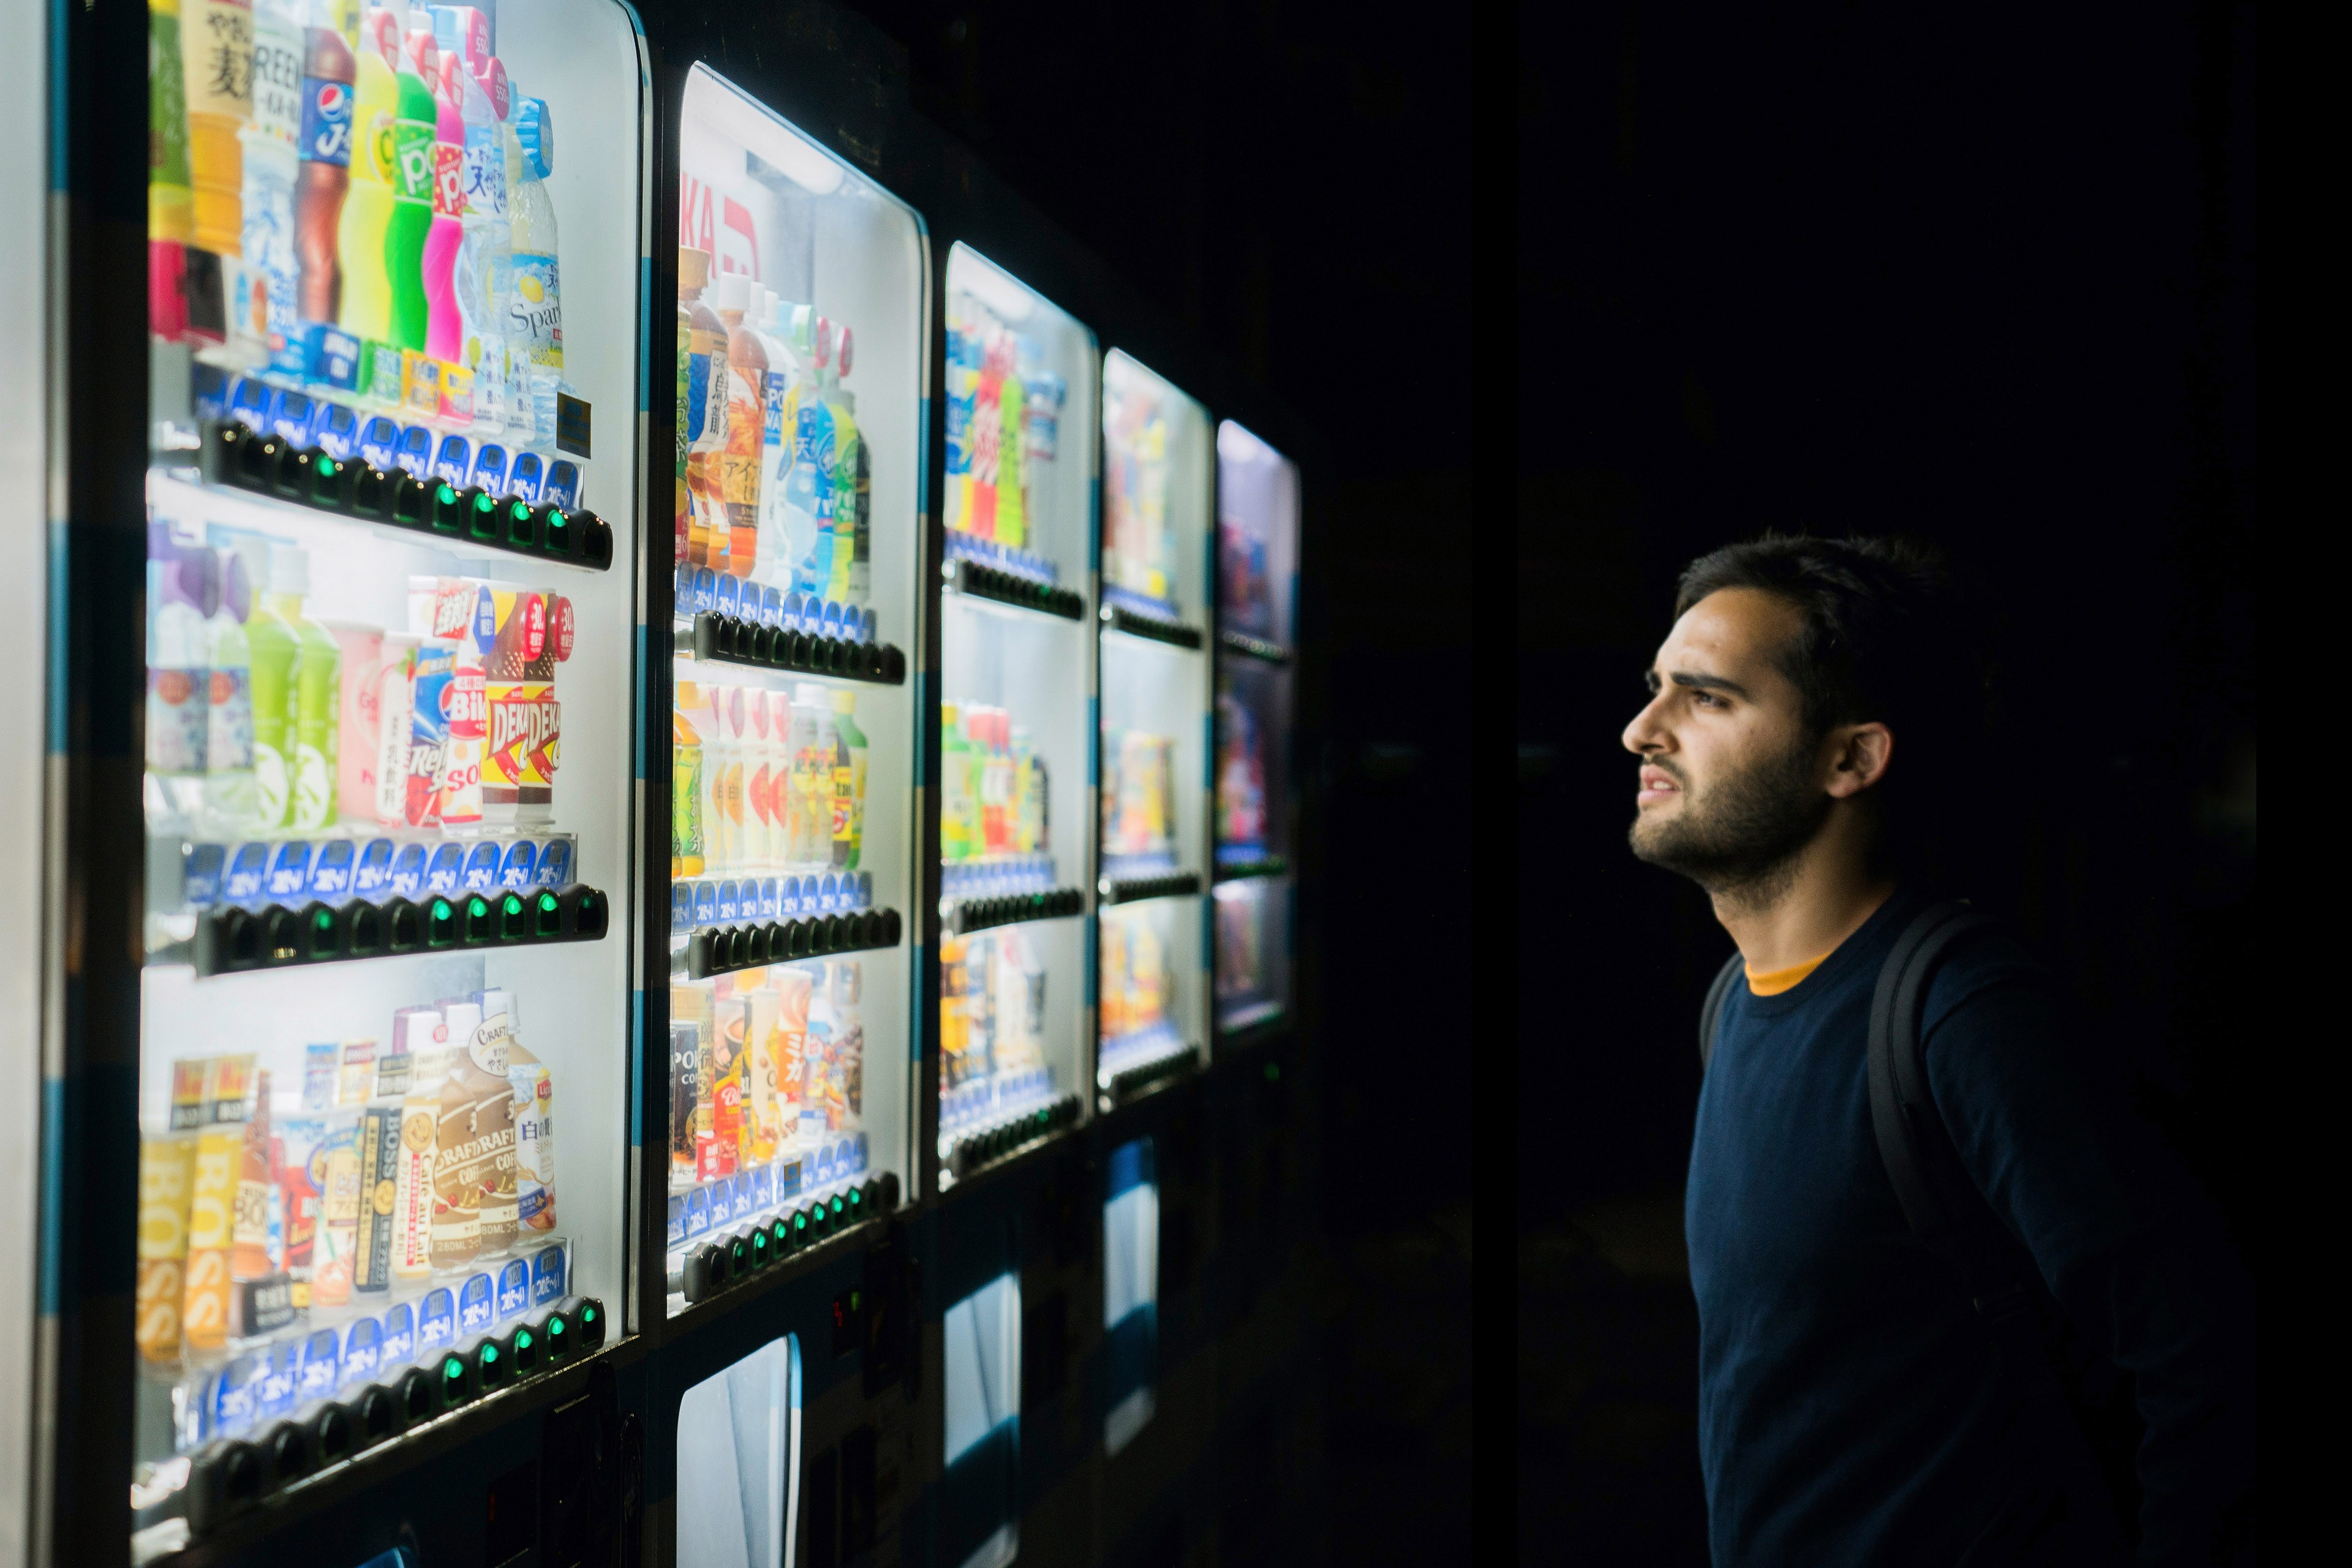 A portrait of a man looking at the vending machine